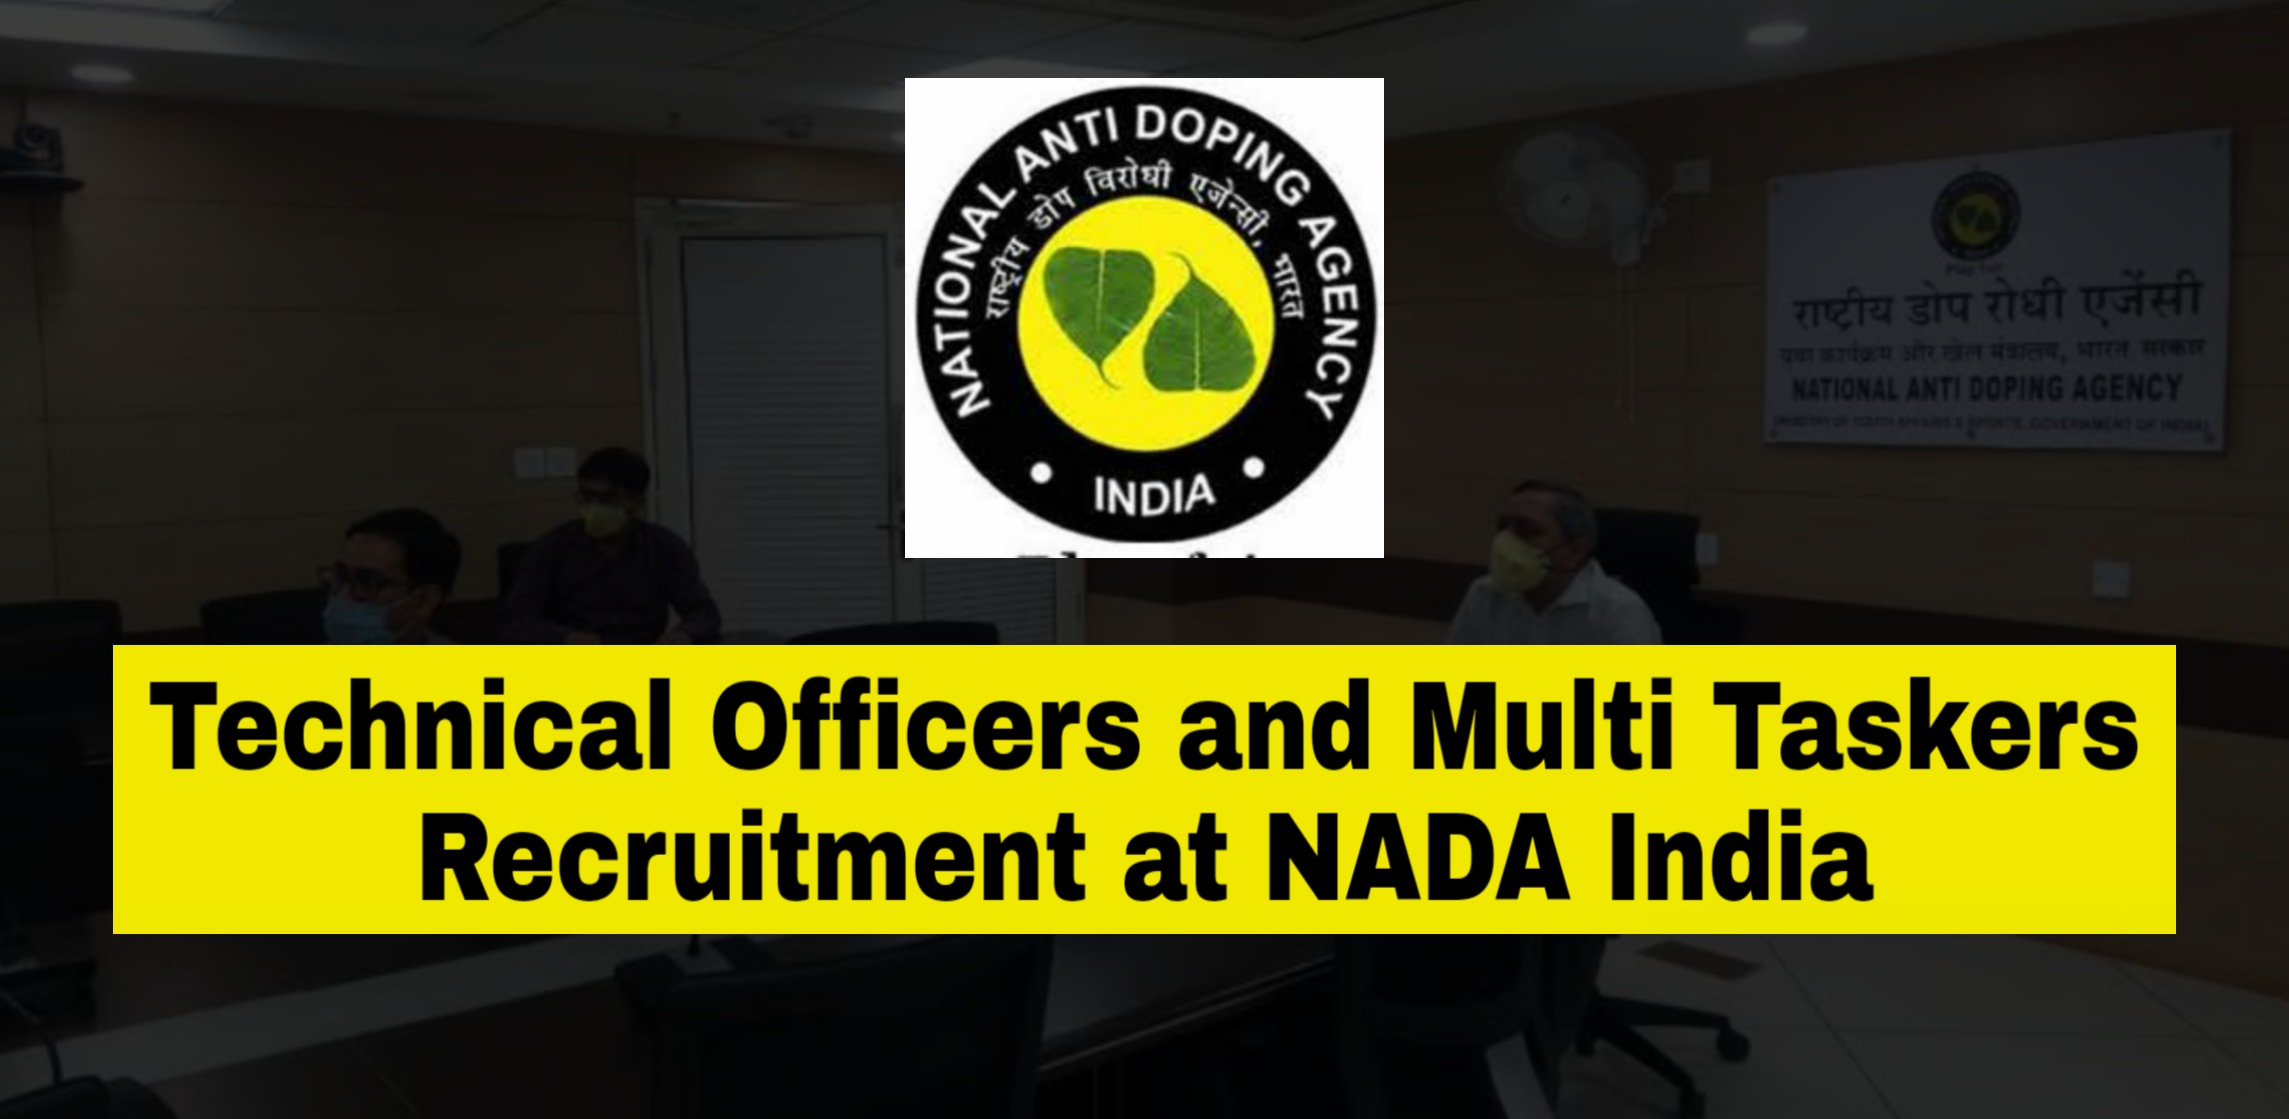 National Anti Doping Agency (NADA) Recruitment 2020 for the post of Technical Officers and Multi Taskers